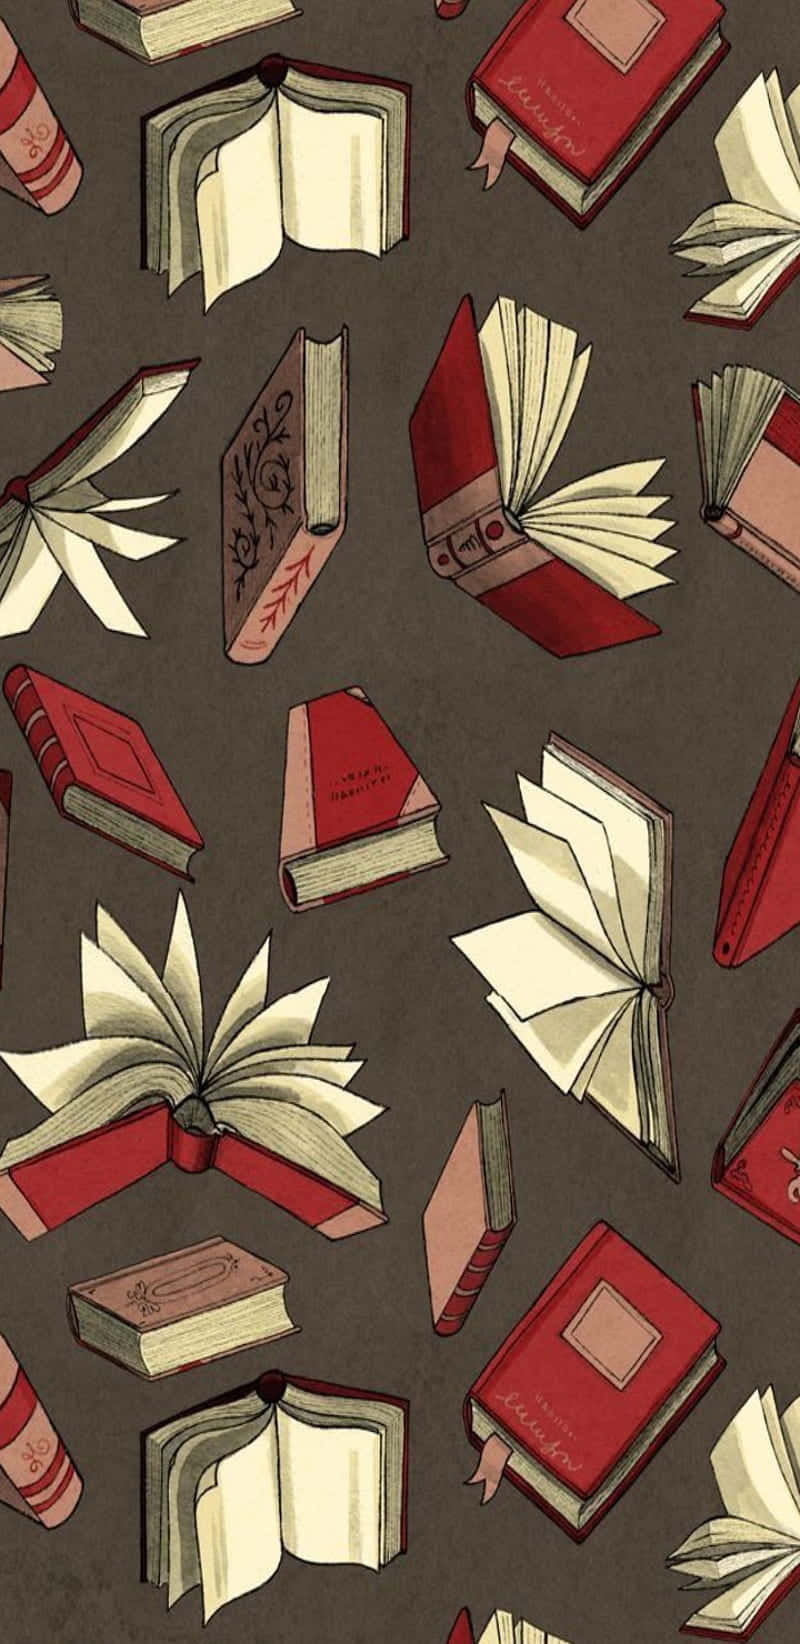 A Pattern Of Books On A Brown Background